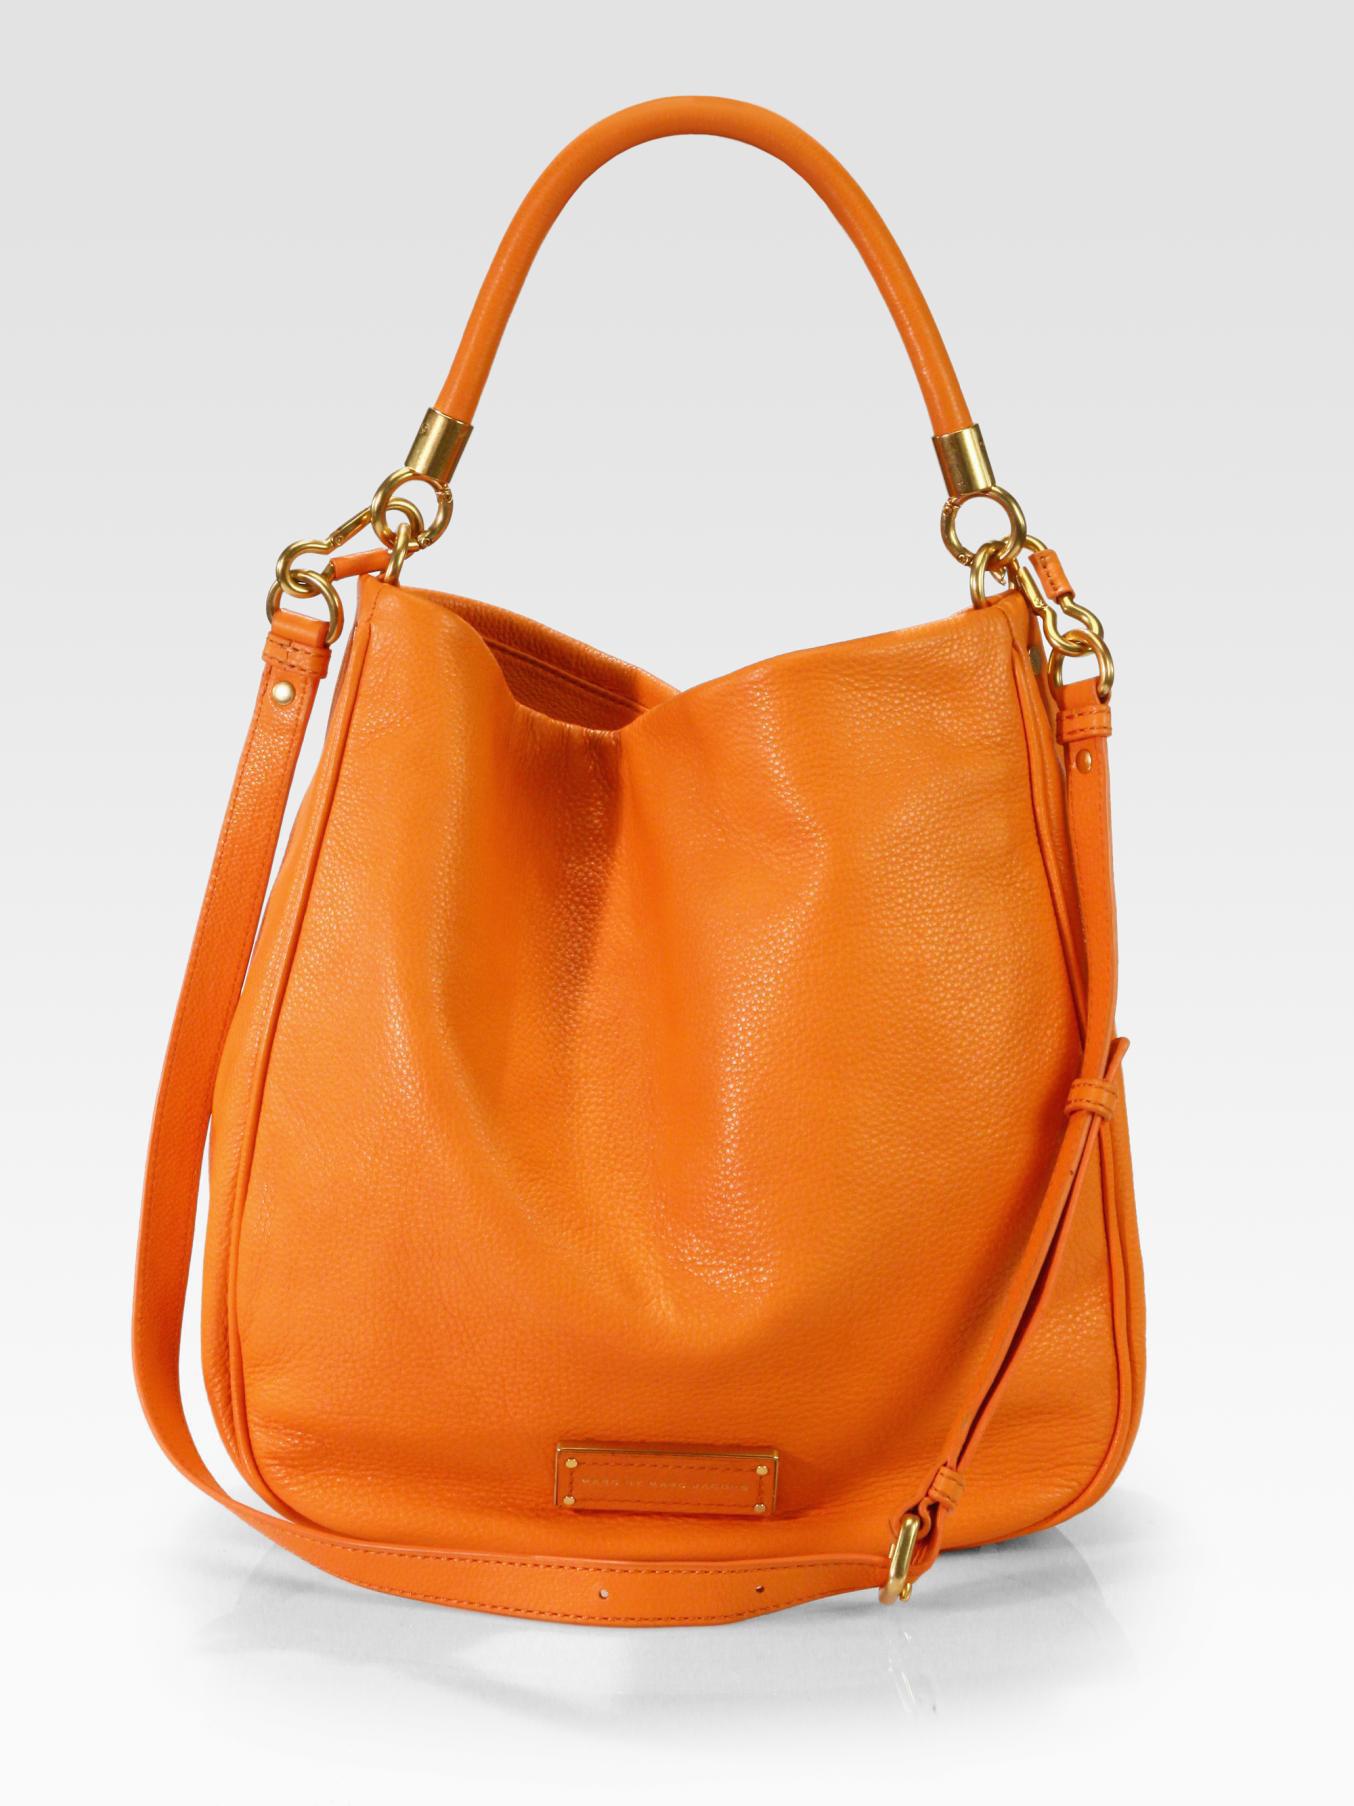 Lyst - Marc By Marc Jacobs Too Hot To Handle Hobo Bag in Orange